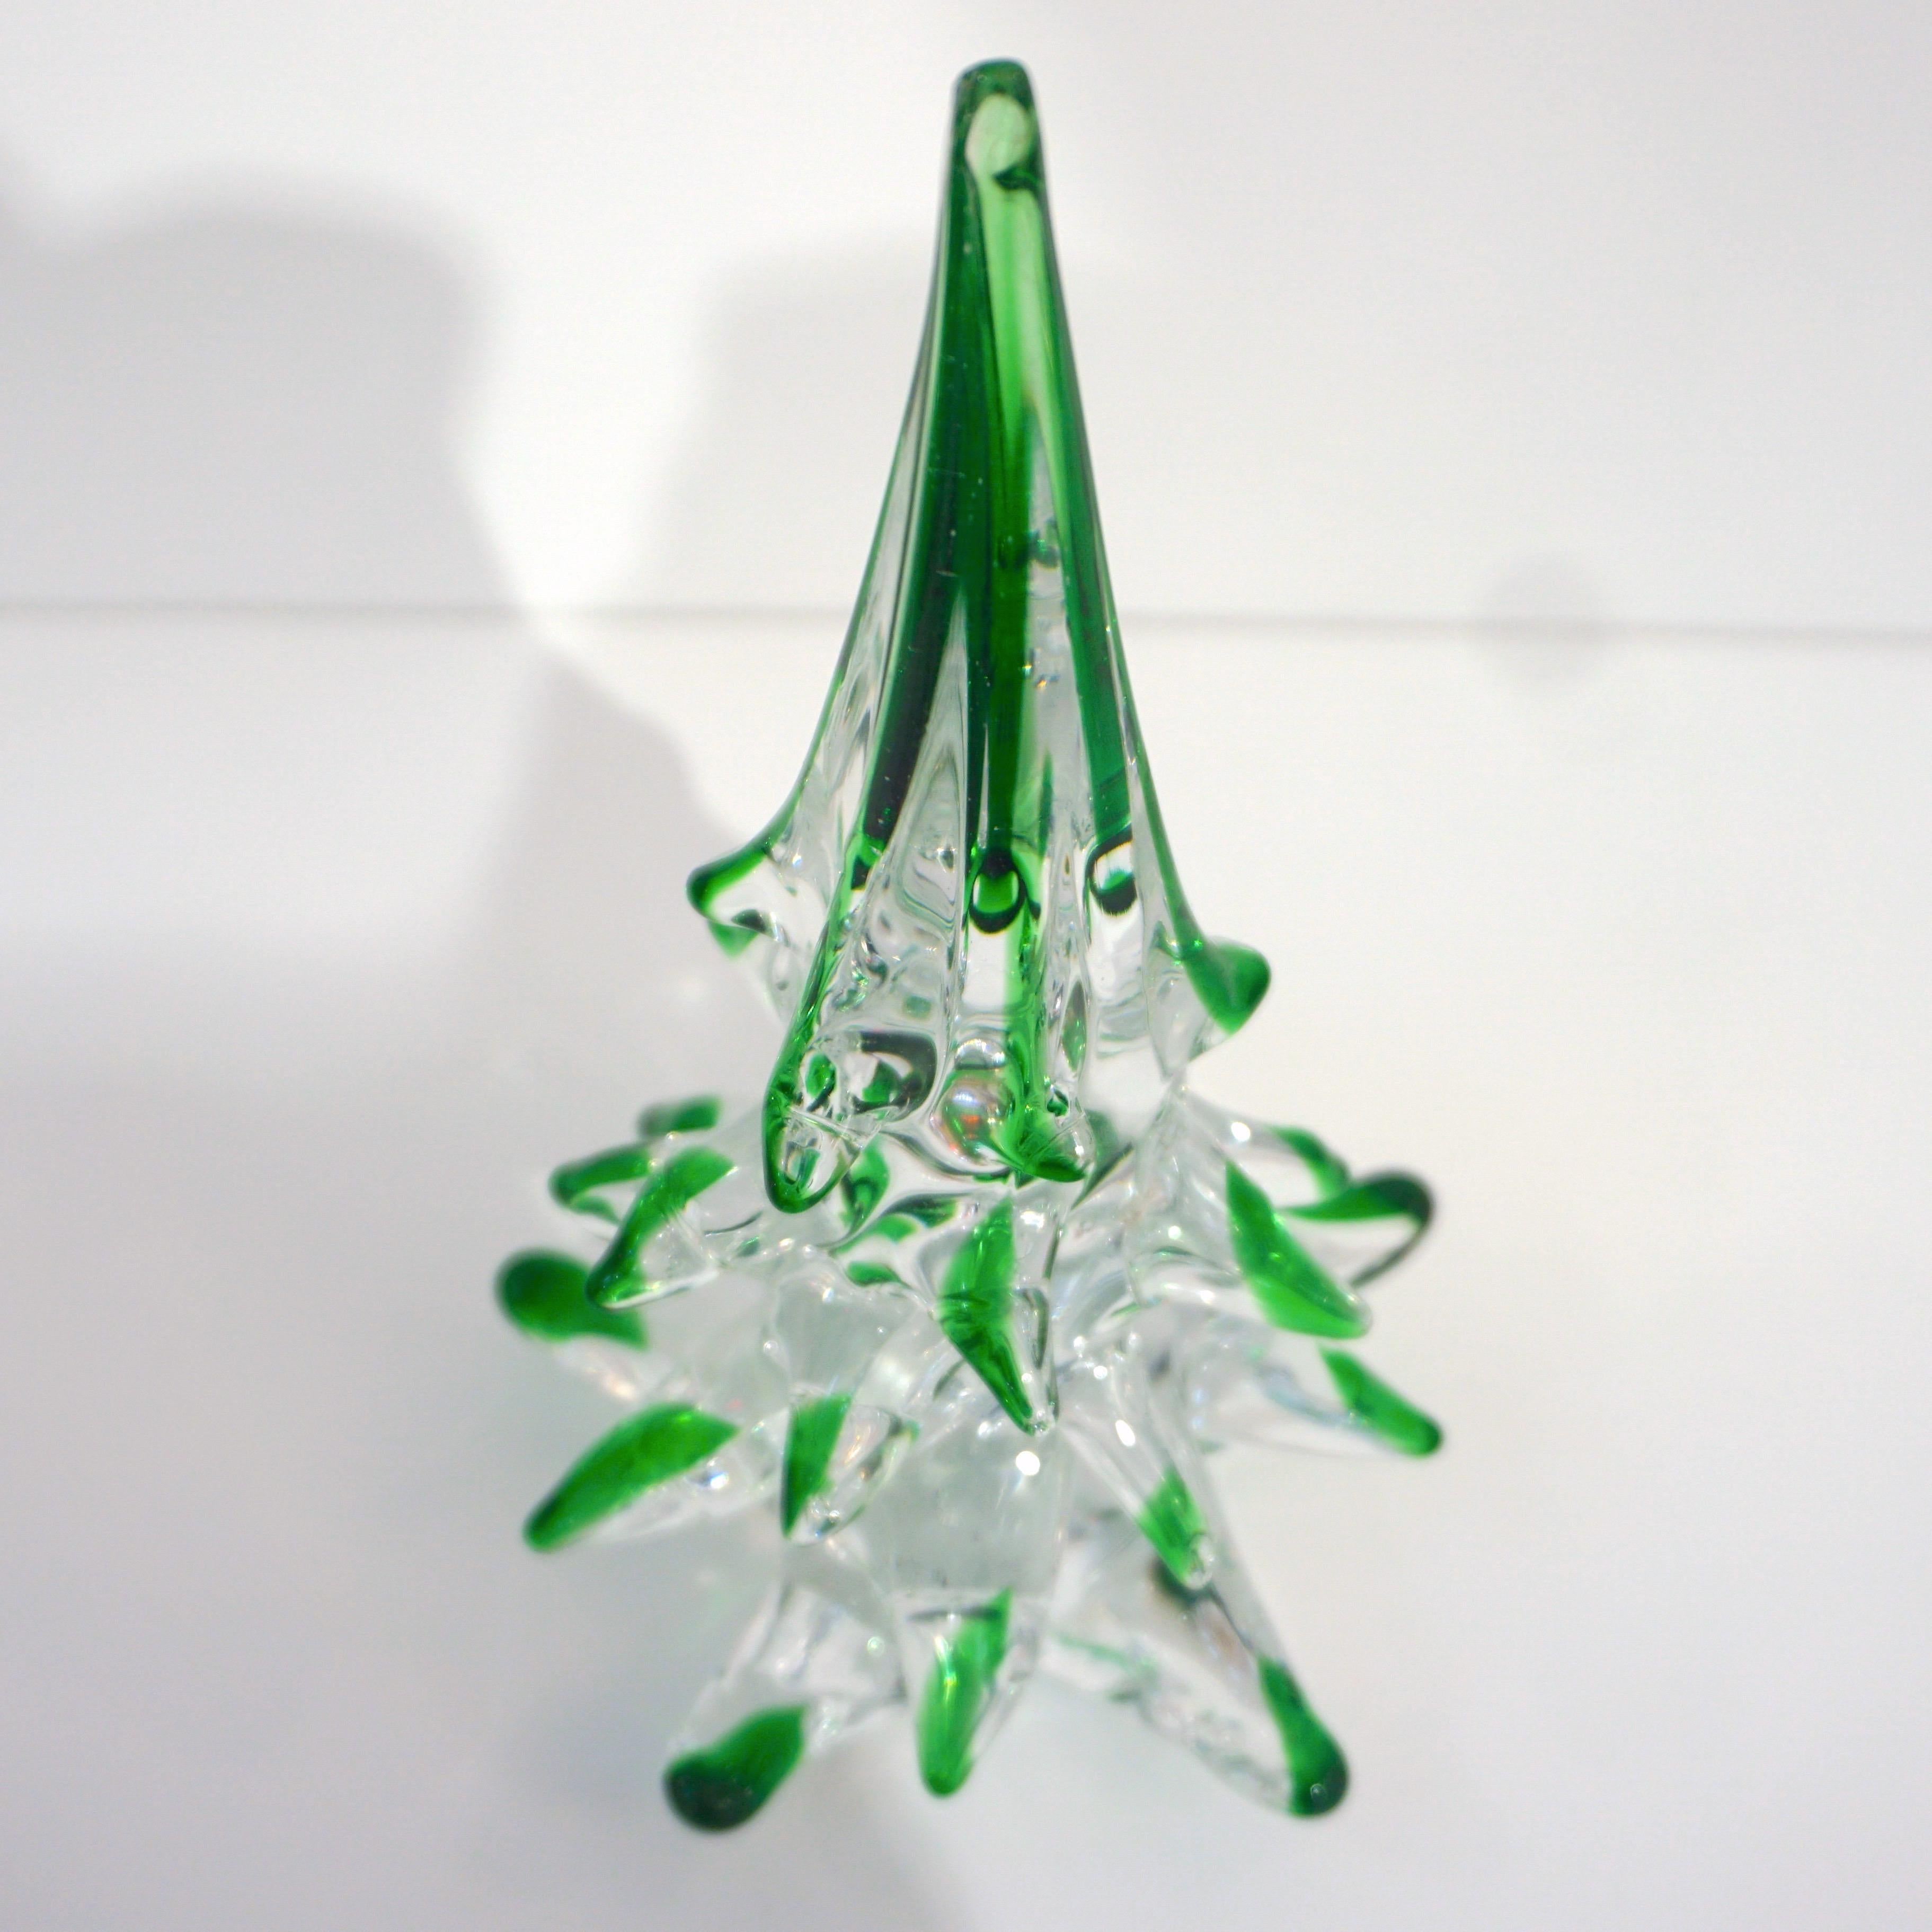 Murano glass tree of organic sleek modern design, a vintage creation signed by Cenedese Murano, individually mouth-blown and handcrafted. The crystal clear Murano glass is worked with the inclusion of forest green filigrana, glass colored canes, and